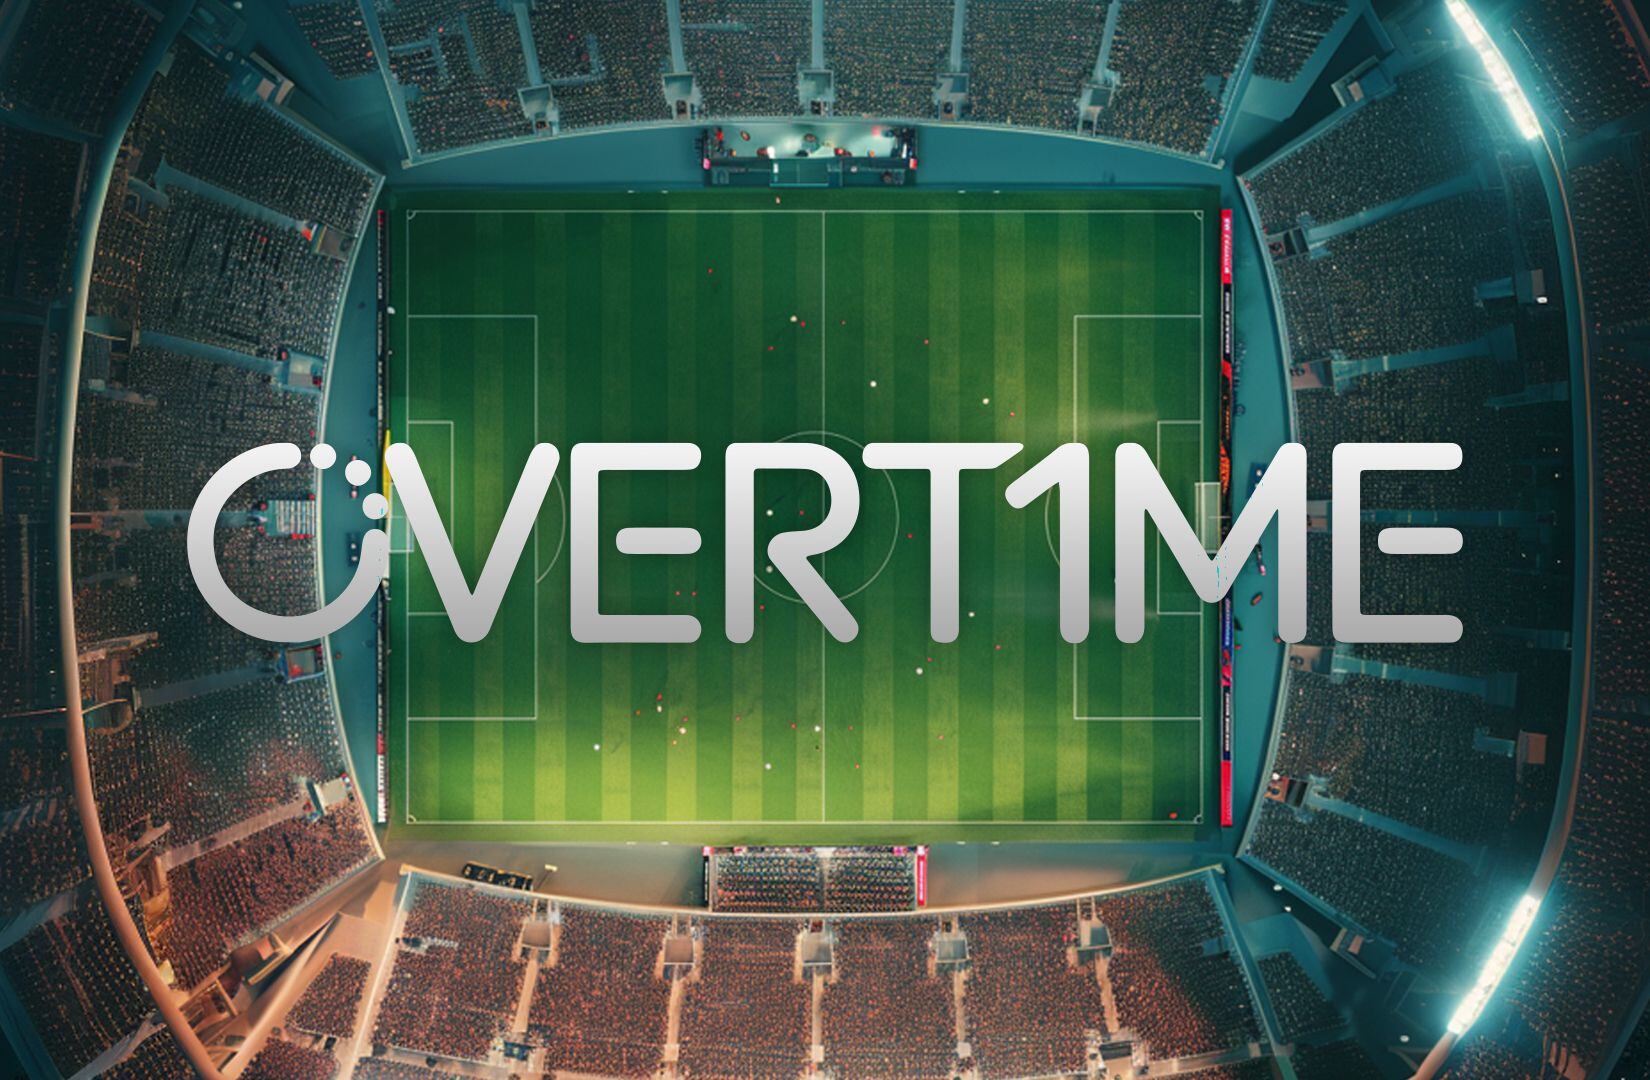 Overtime Markets lets sports bettors play as the house with over 100% gains for some